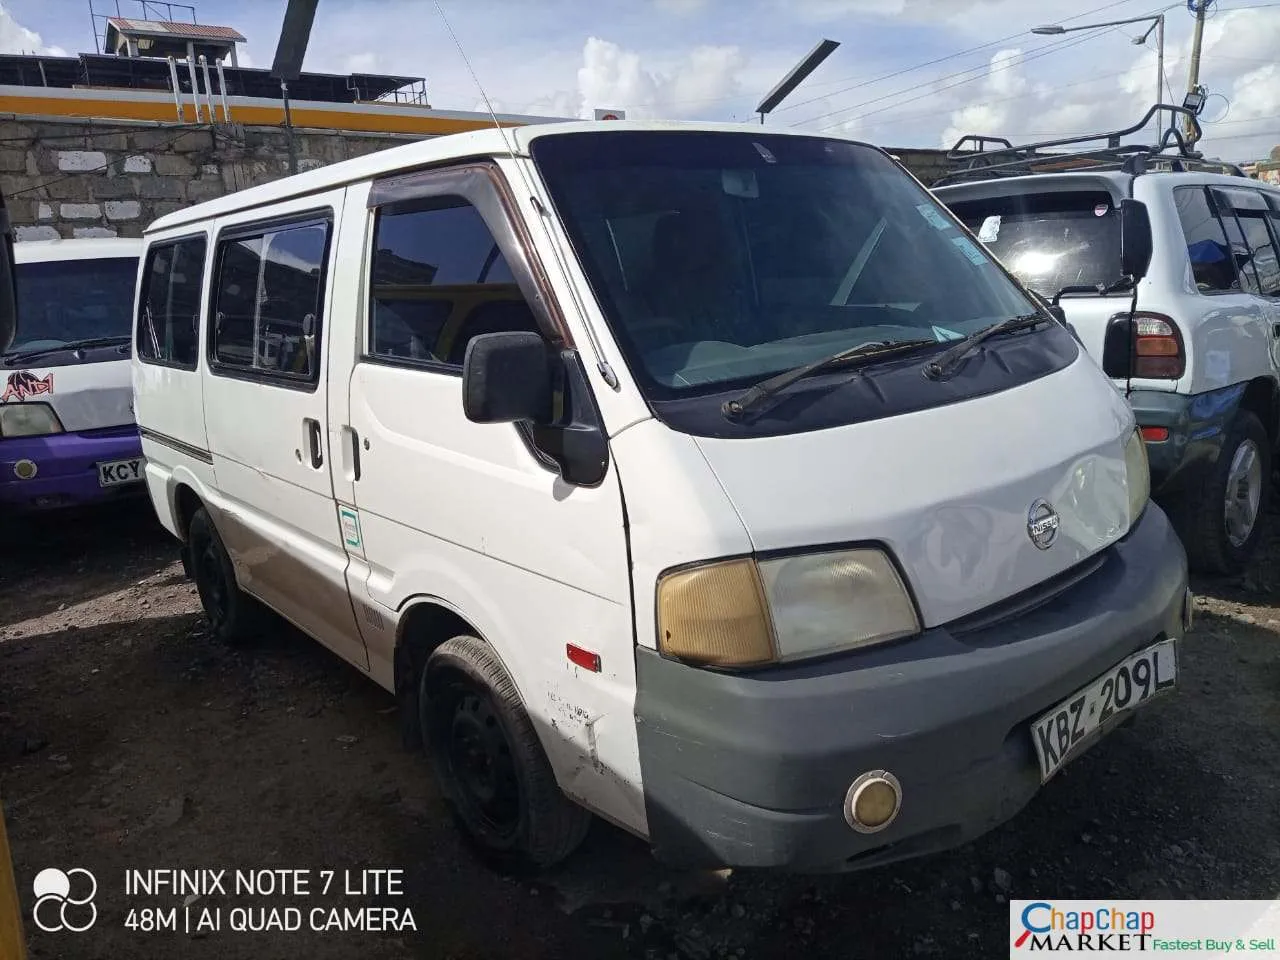 Cars Cars For Sale/Vehicles-Nissan Vanette Private 380k Only You Pay 40% DEPOSIT TRADE IN OK EXCLUSIVE 4